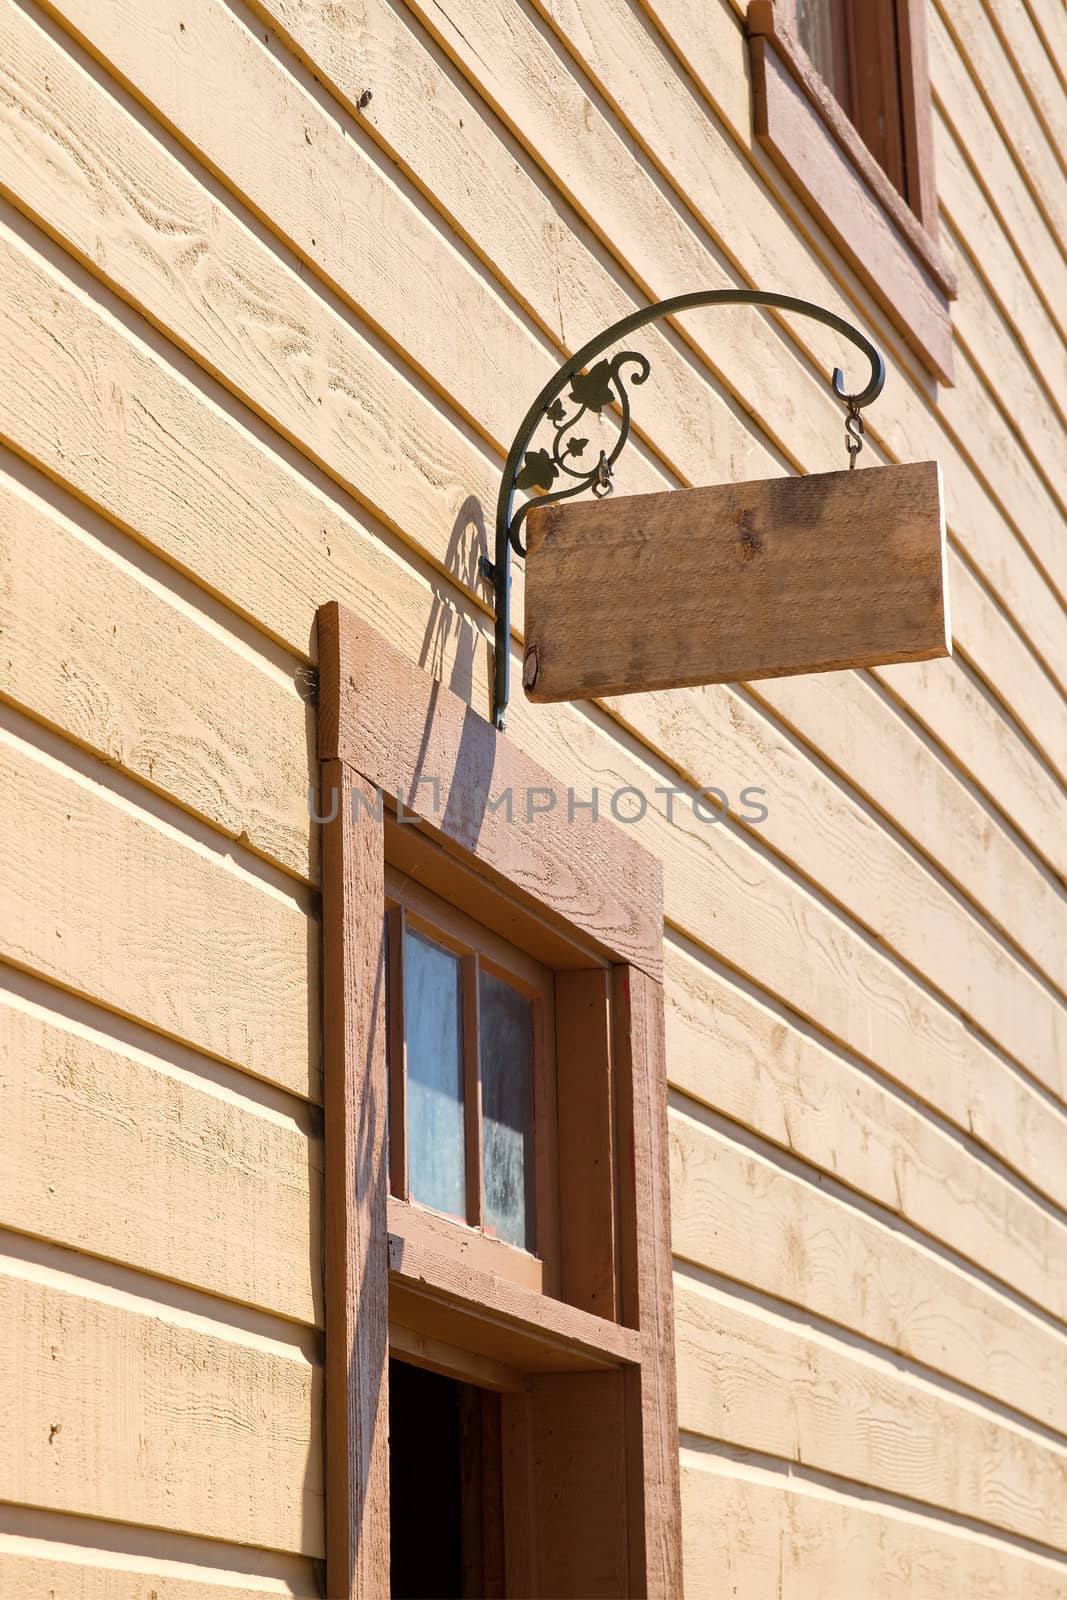 Signage on Historic Building by jpldesigns